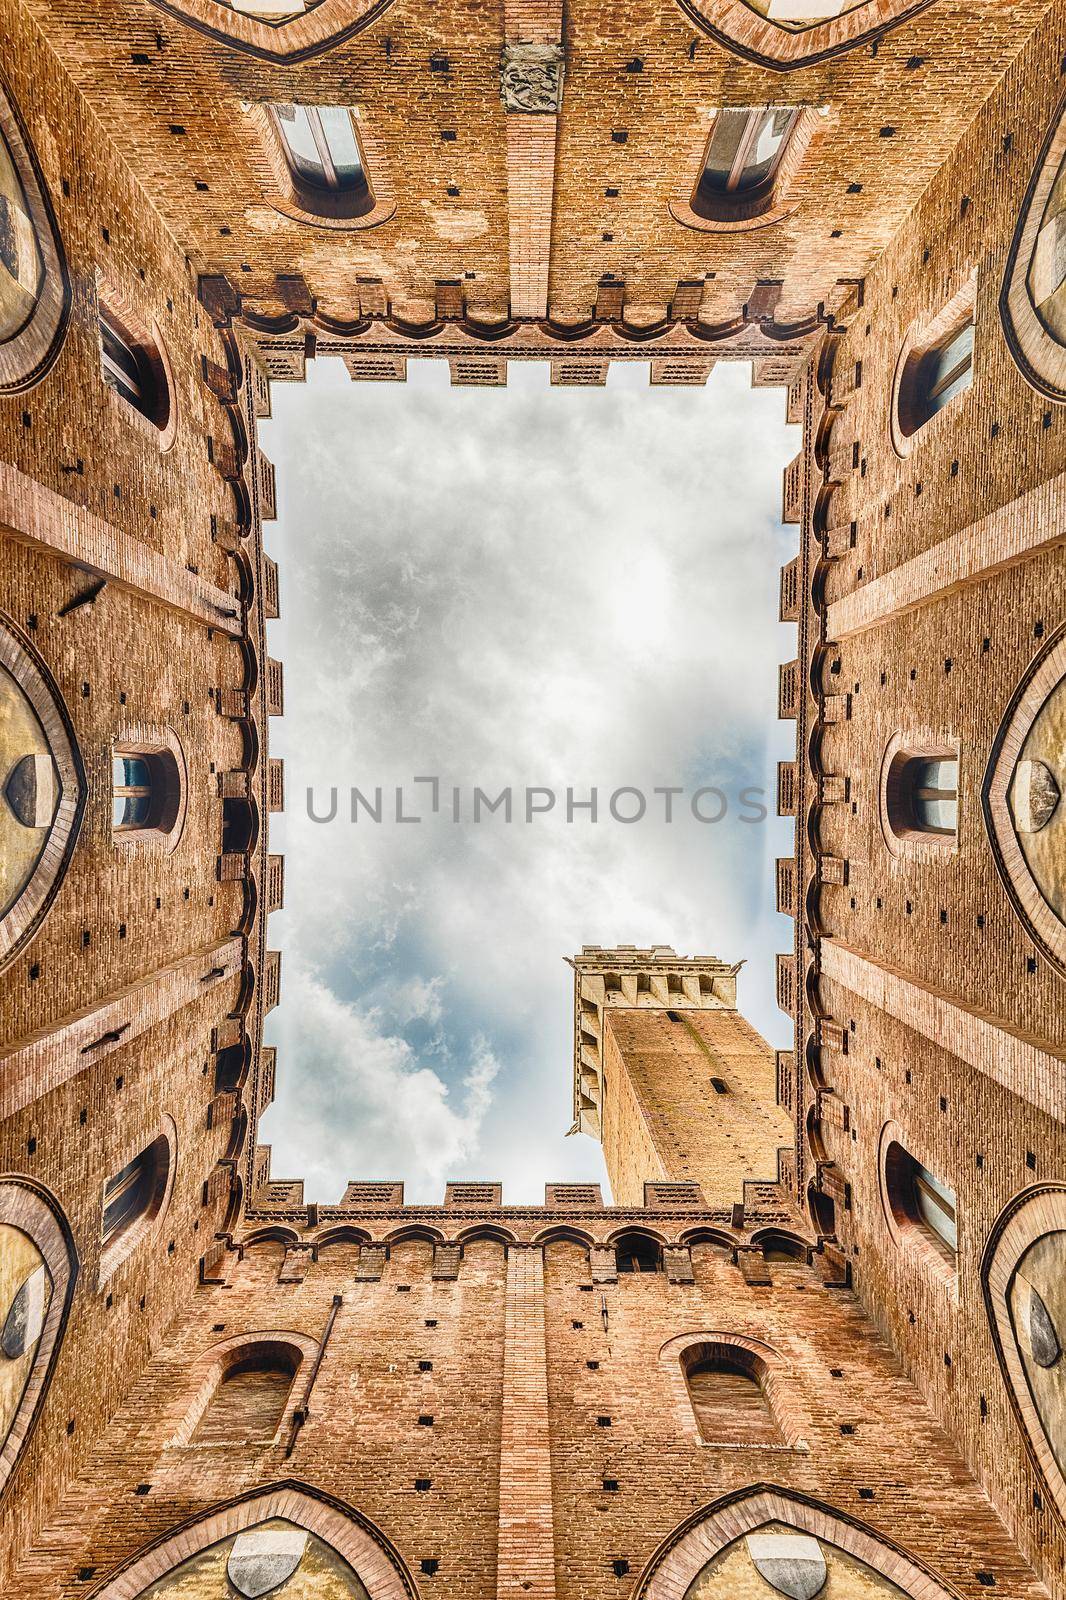 View from the bottom, patio of Palazzo Pubblico, Siena, Italy by marcorubino